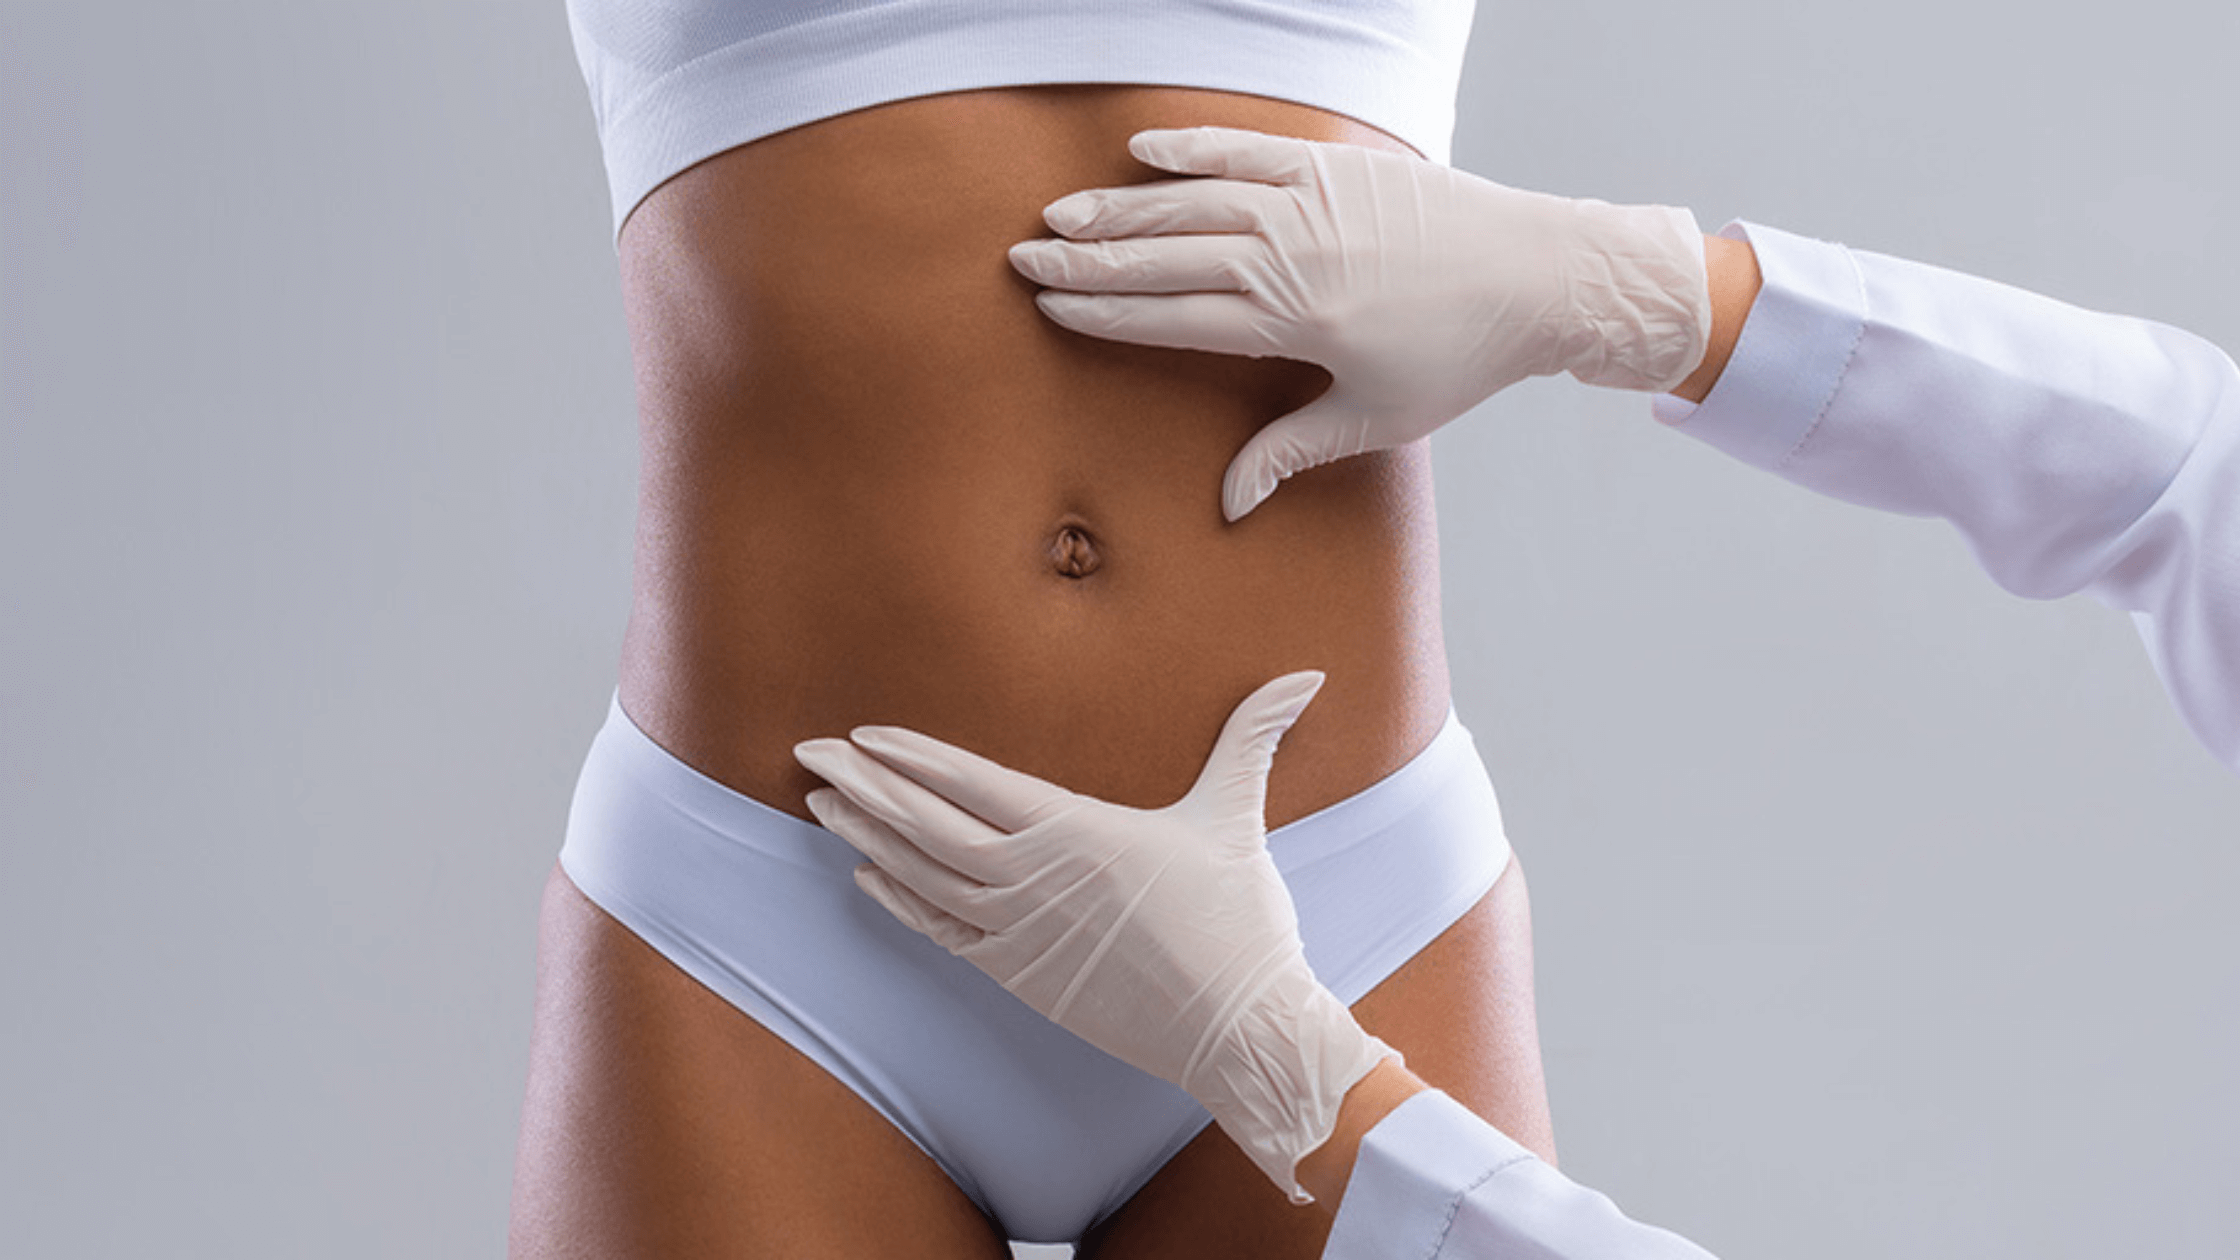 Resuming Intensive Exercise After Tummy Tuck: Too Soon?